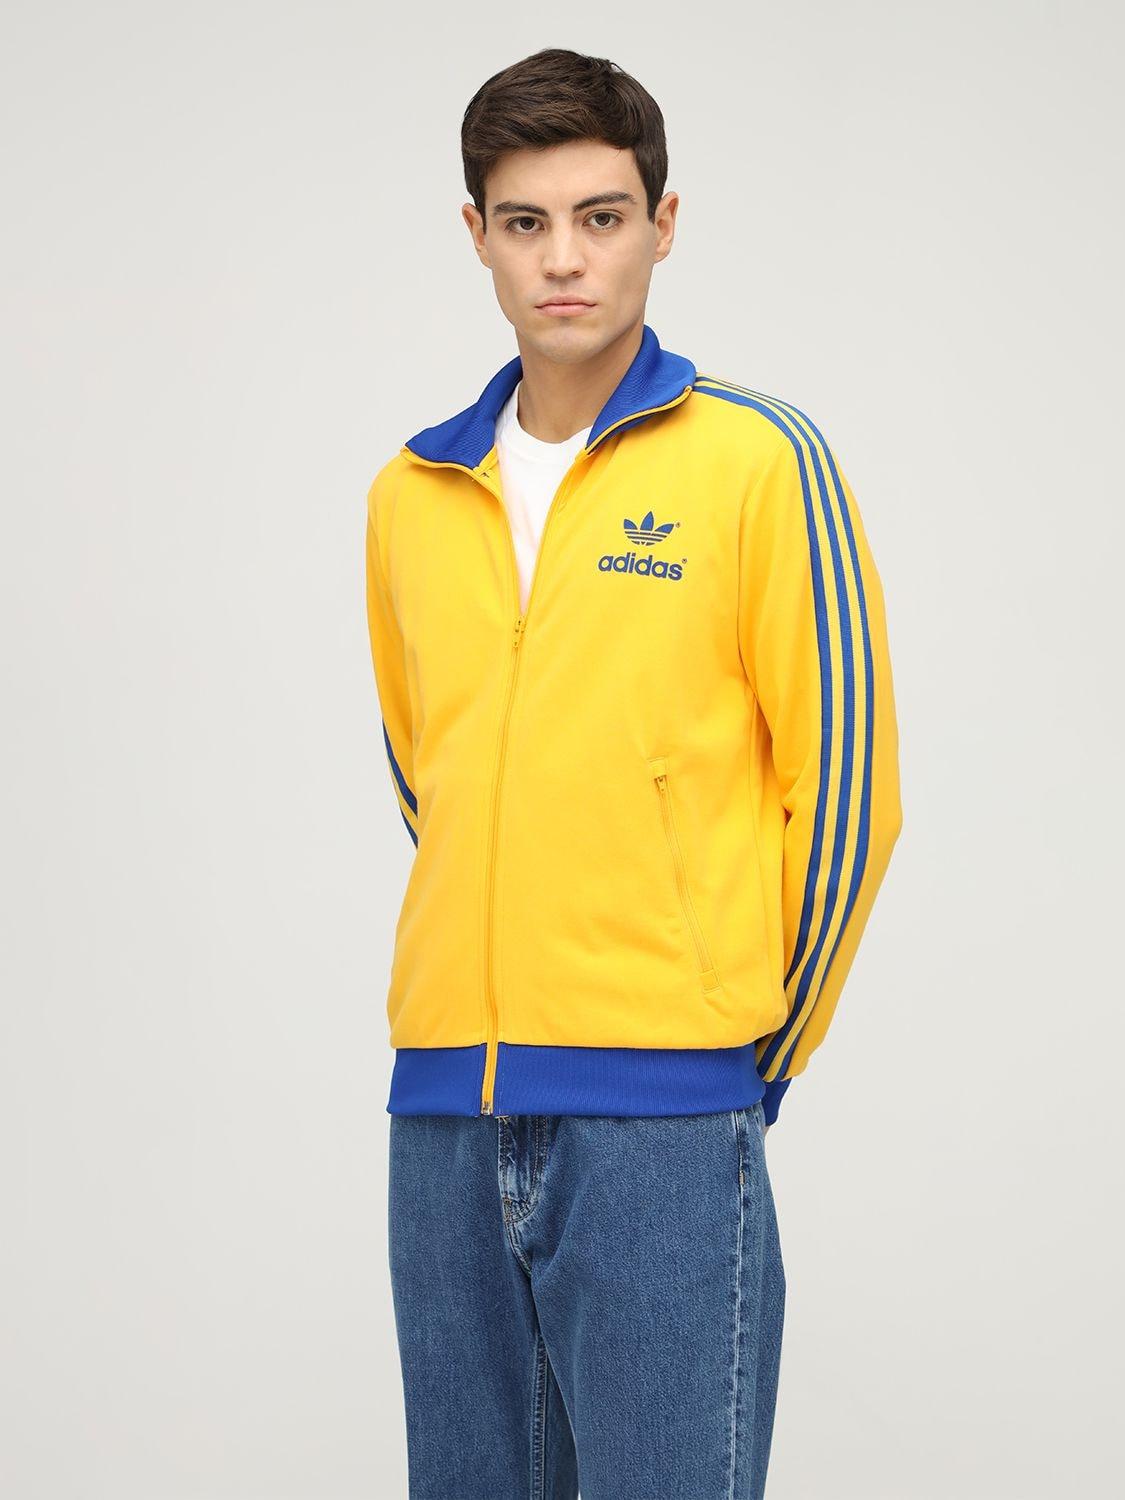 adidas Originals 70s Polytrico Track Jacket in Yellow for Men | Lyst